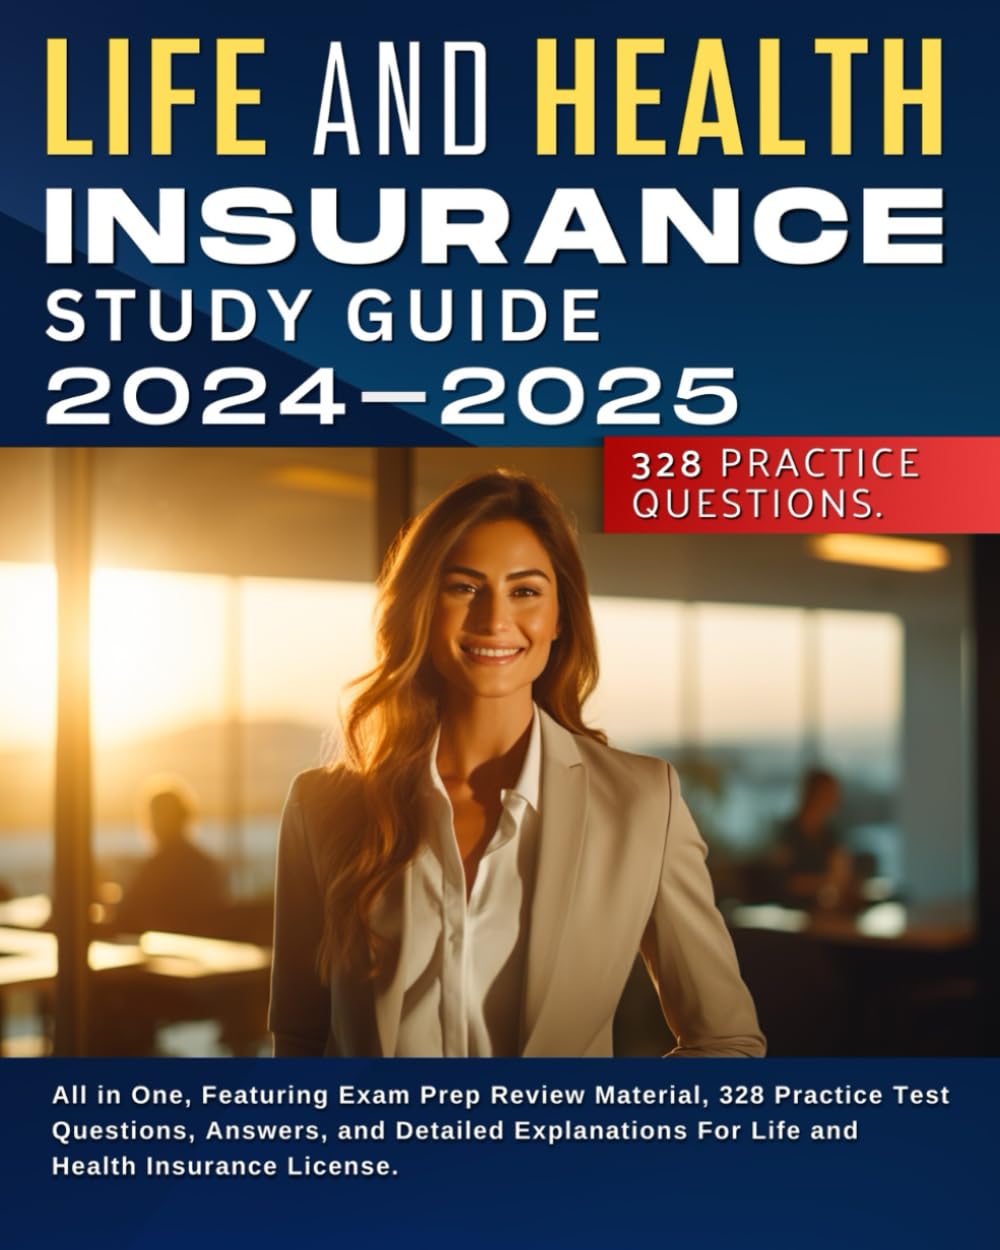 Life and Health Insurance Study Guide 2024-2025: All in One, Featuring Exam Prep Review Material, 328 Practice Test Questions, Answers, and Detailed Explanations For Life and Health Insurance License.